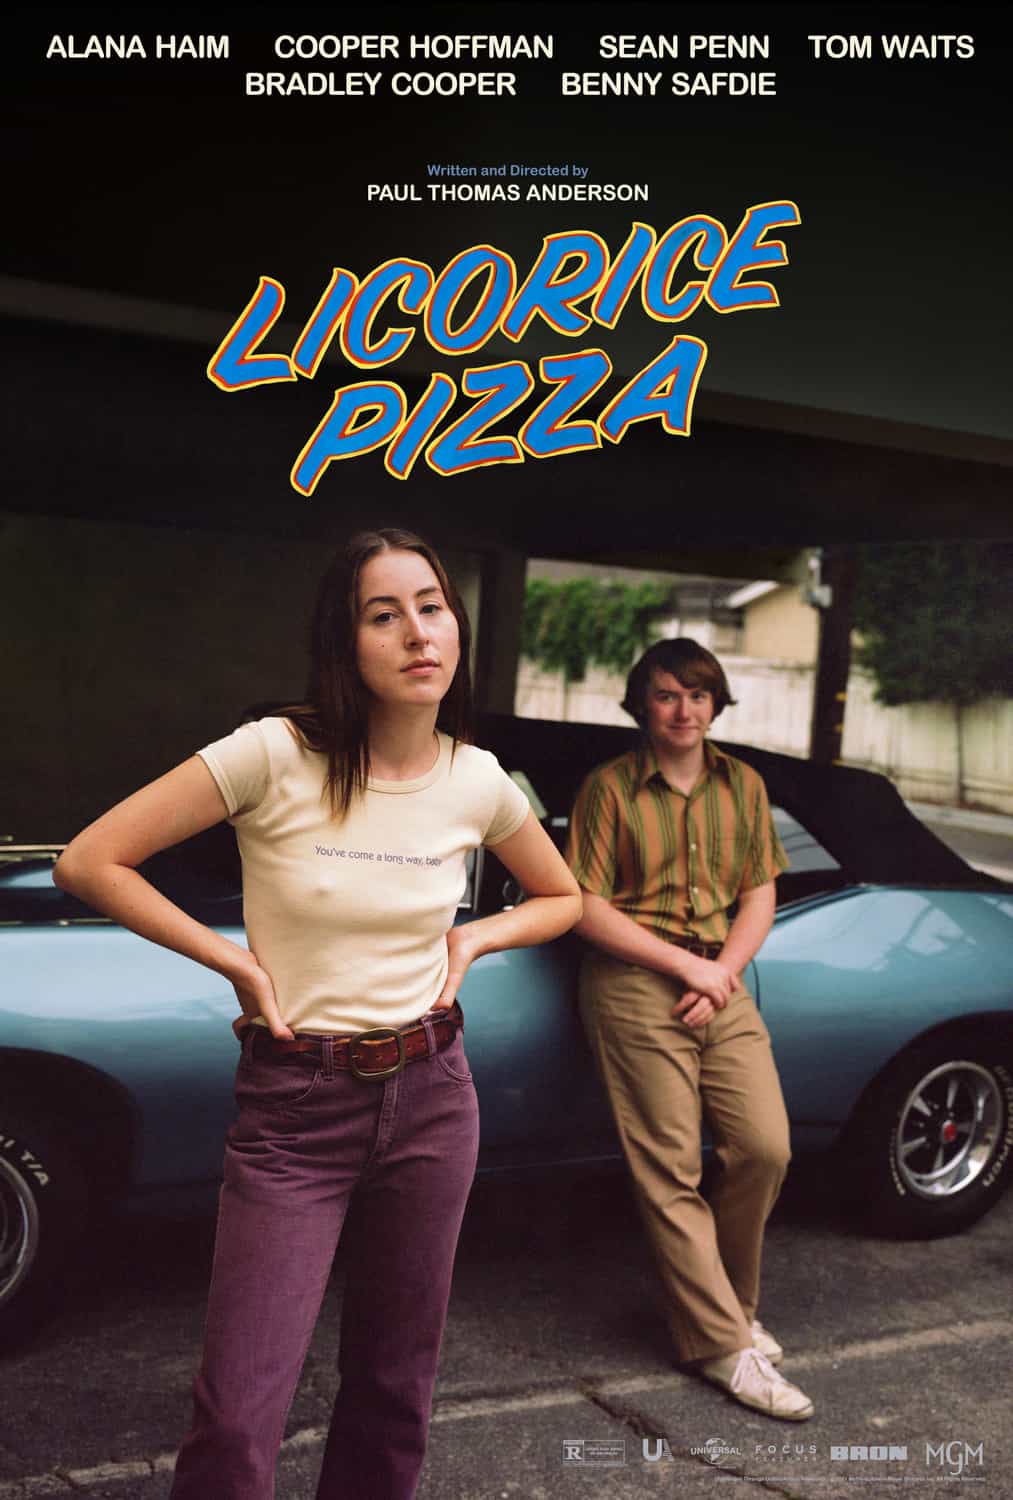 UK new movie preview Friday, 31st December 2021 - Licorice Pizza, Malibu Road, The Humans and The Electrical Life of Louis Wain